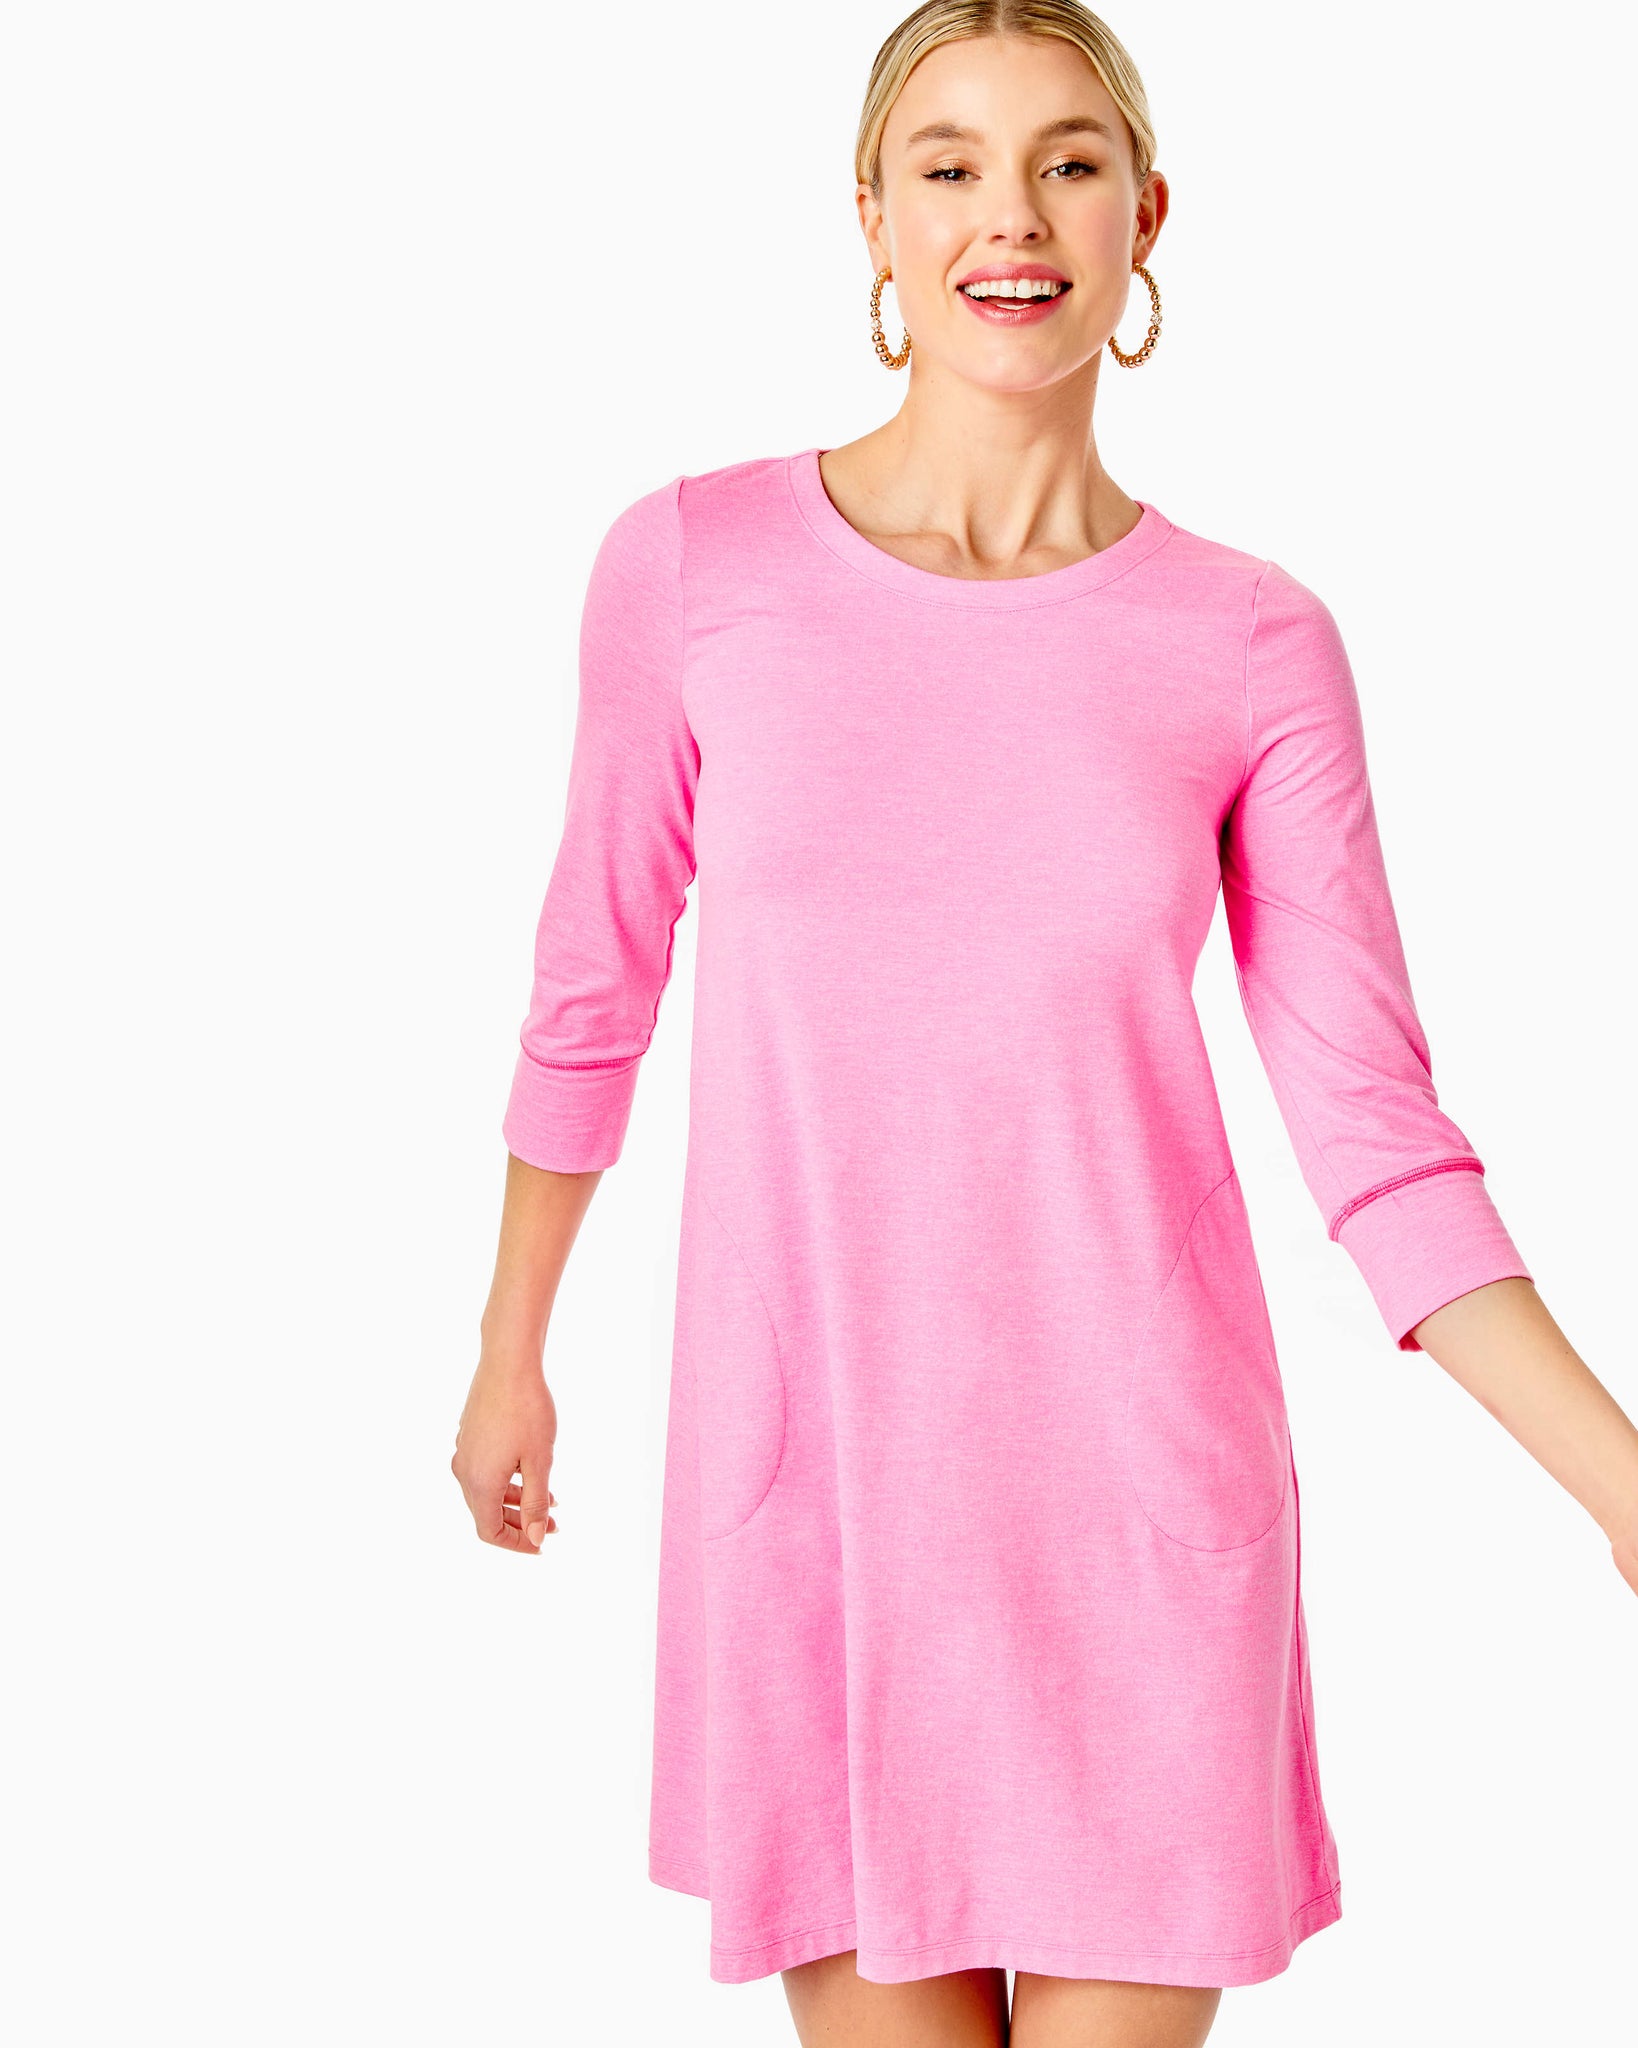 Upf 50 Plus Sophie Dress – Splash of Pink - Your Lilly Pulitzer Store